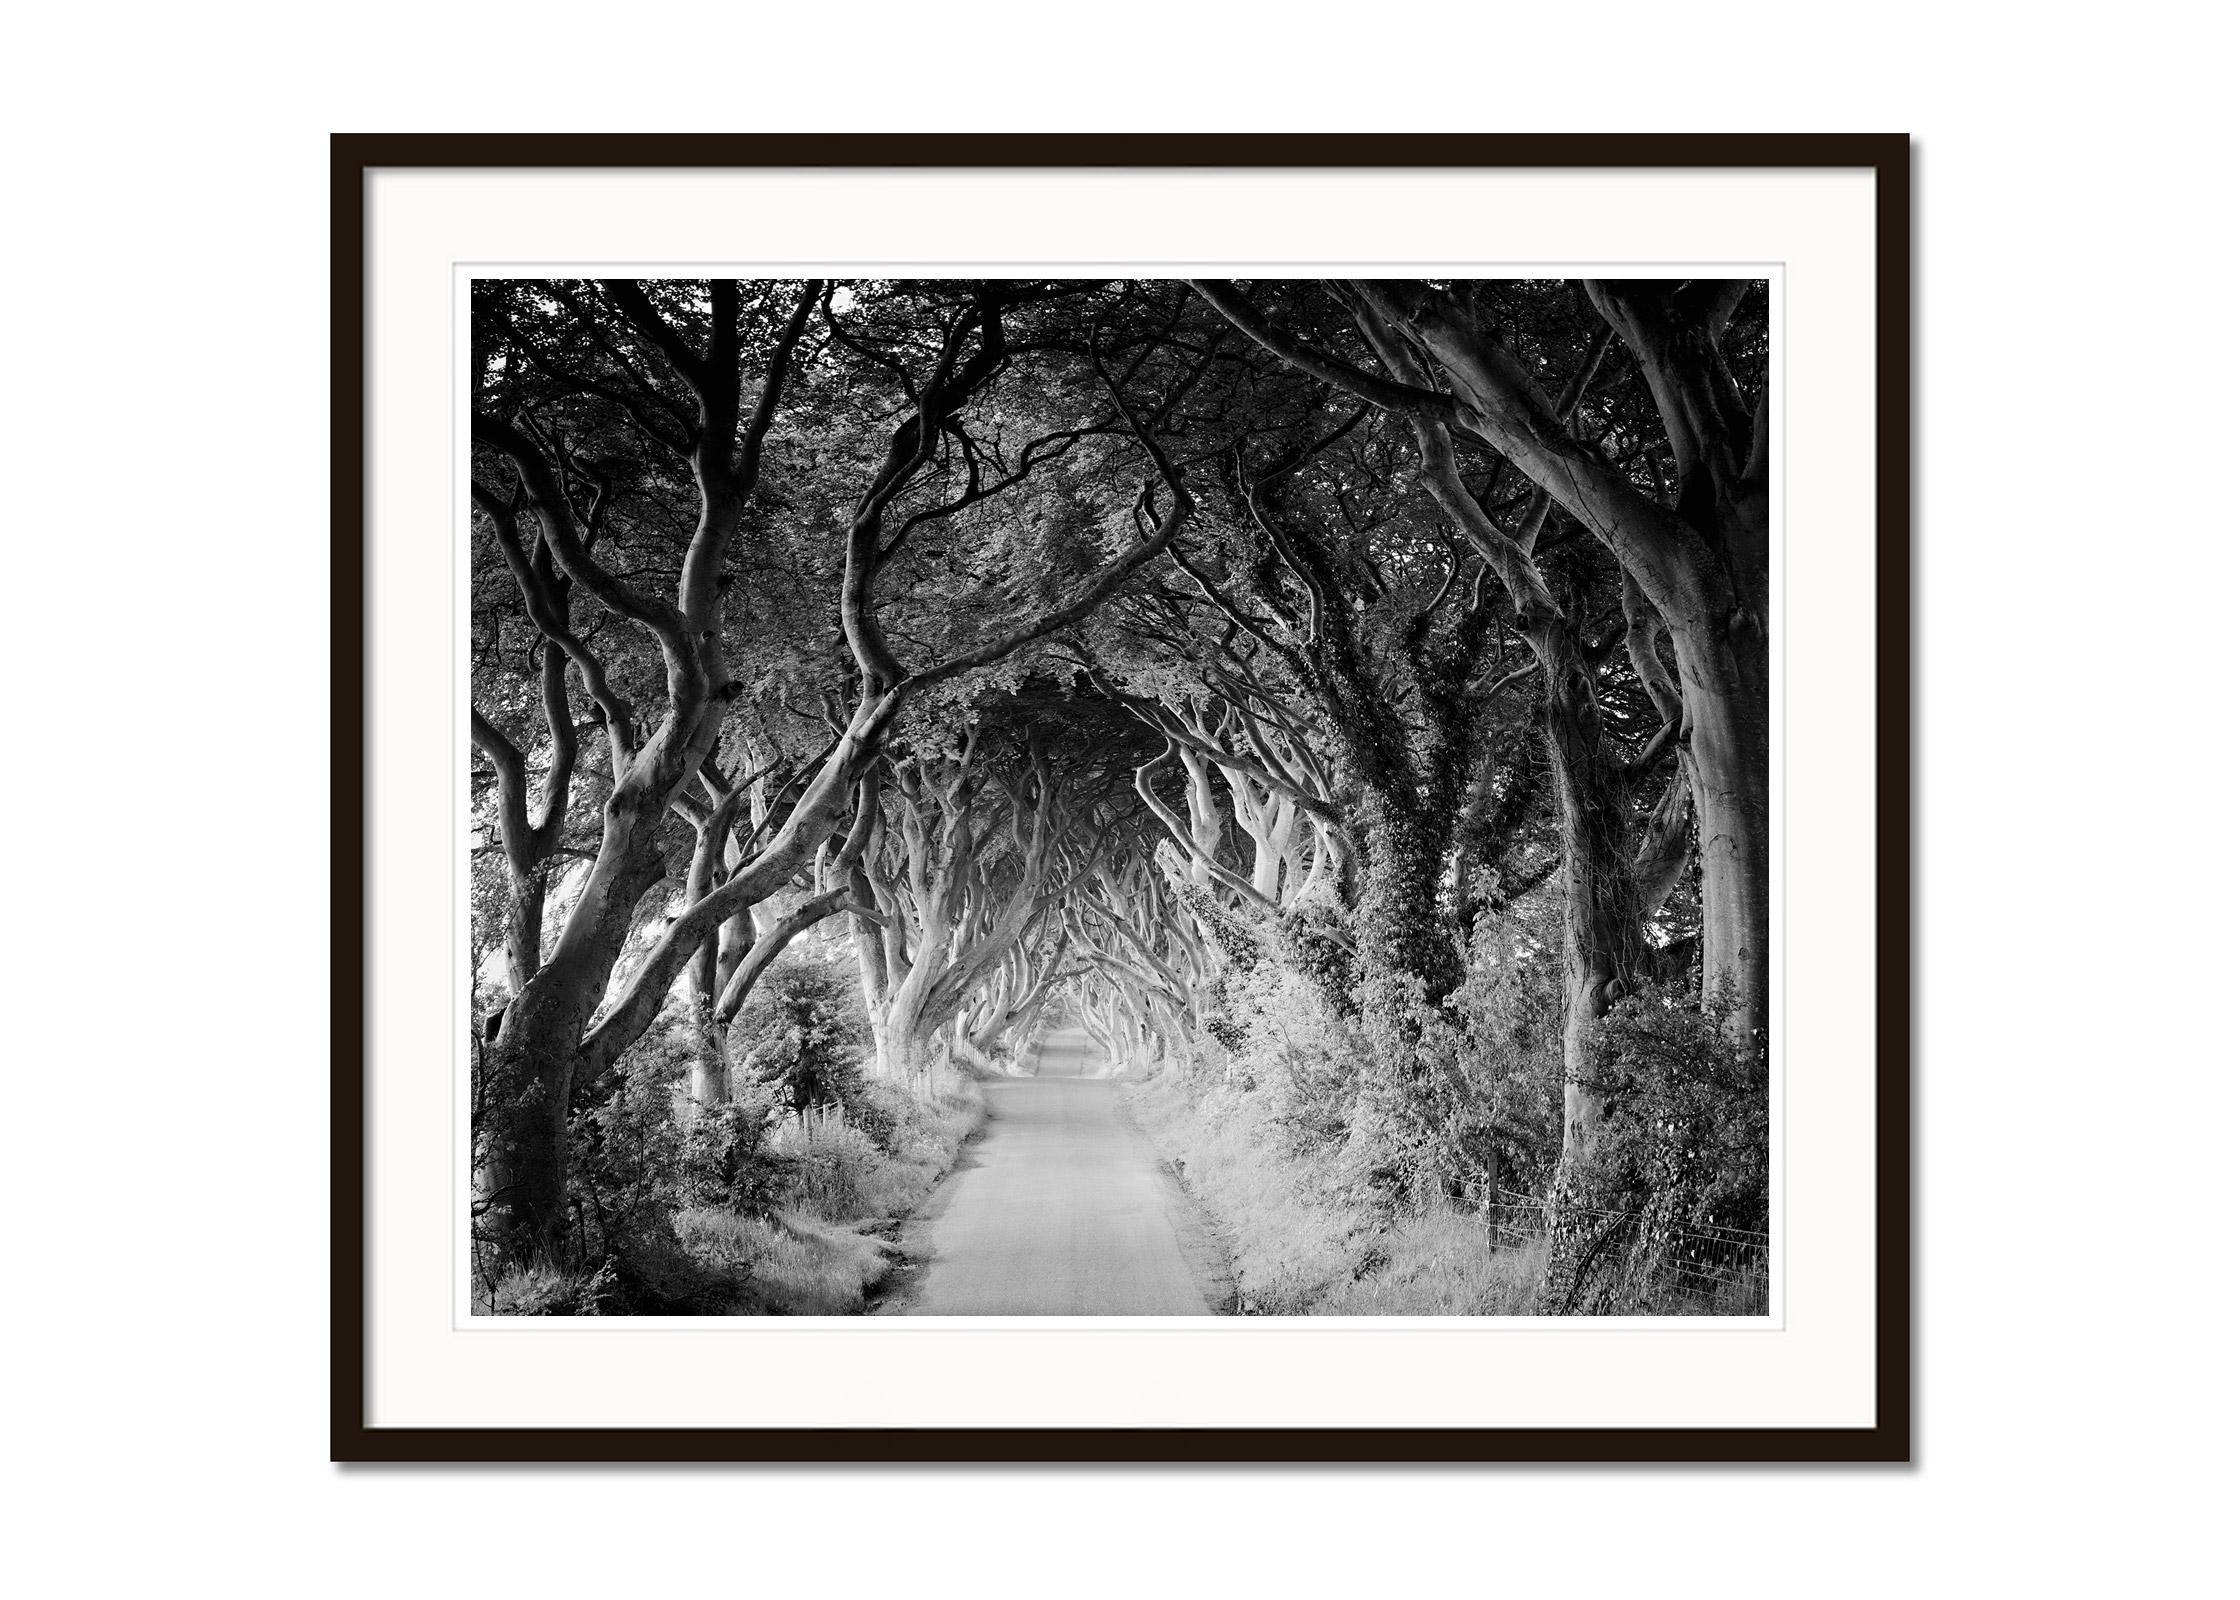 Dark Hedges, beech, trees, Ireland, black and white art landscape photography - Black Black and White Photograph by Gerald Berghammer